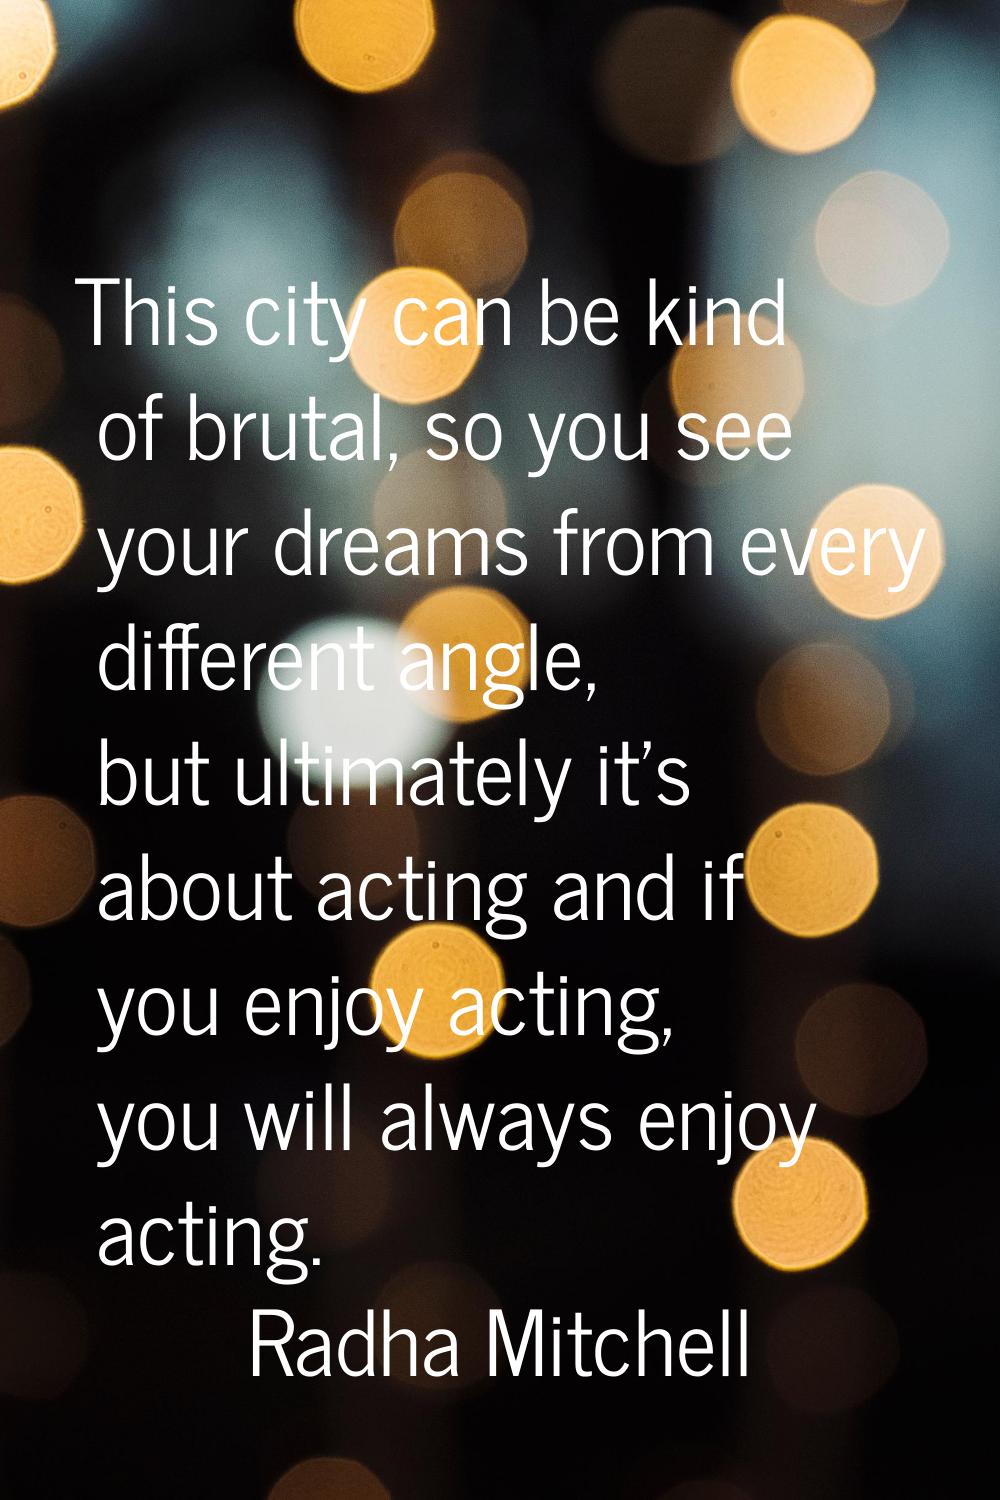 This city can be kind of brutal, so you see your dreams from every different angle, but ultimately 